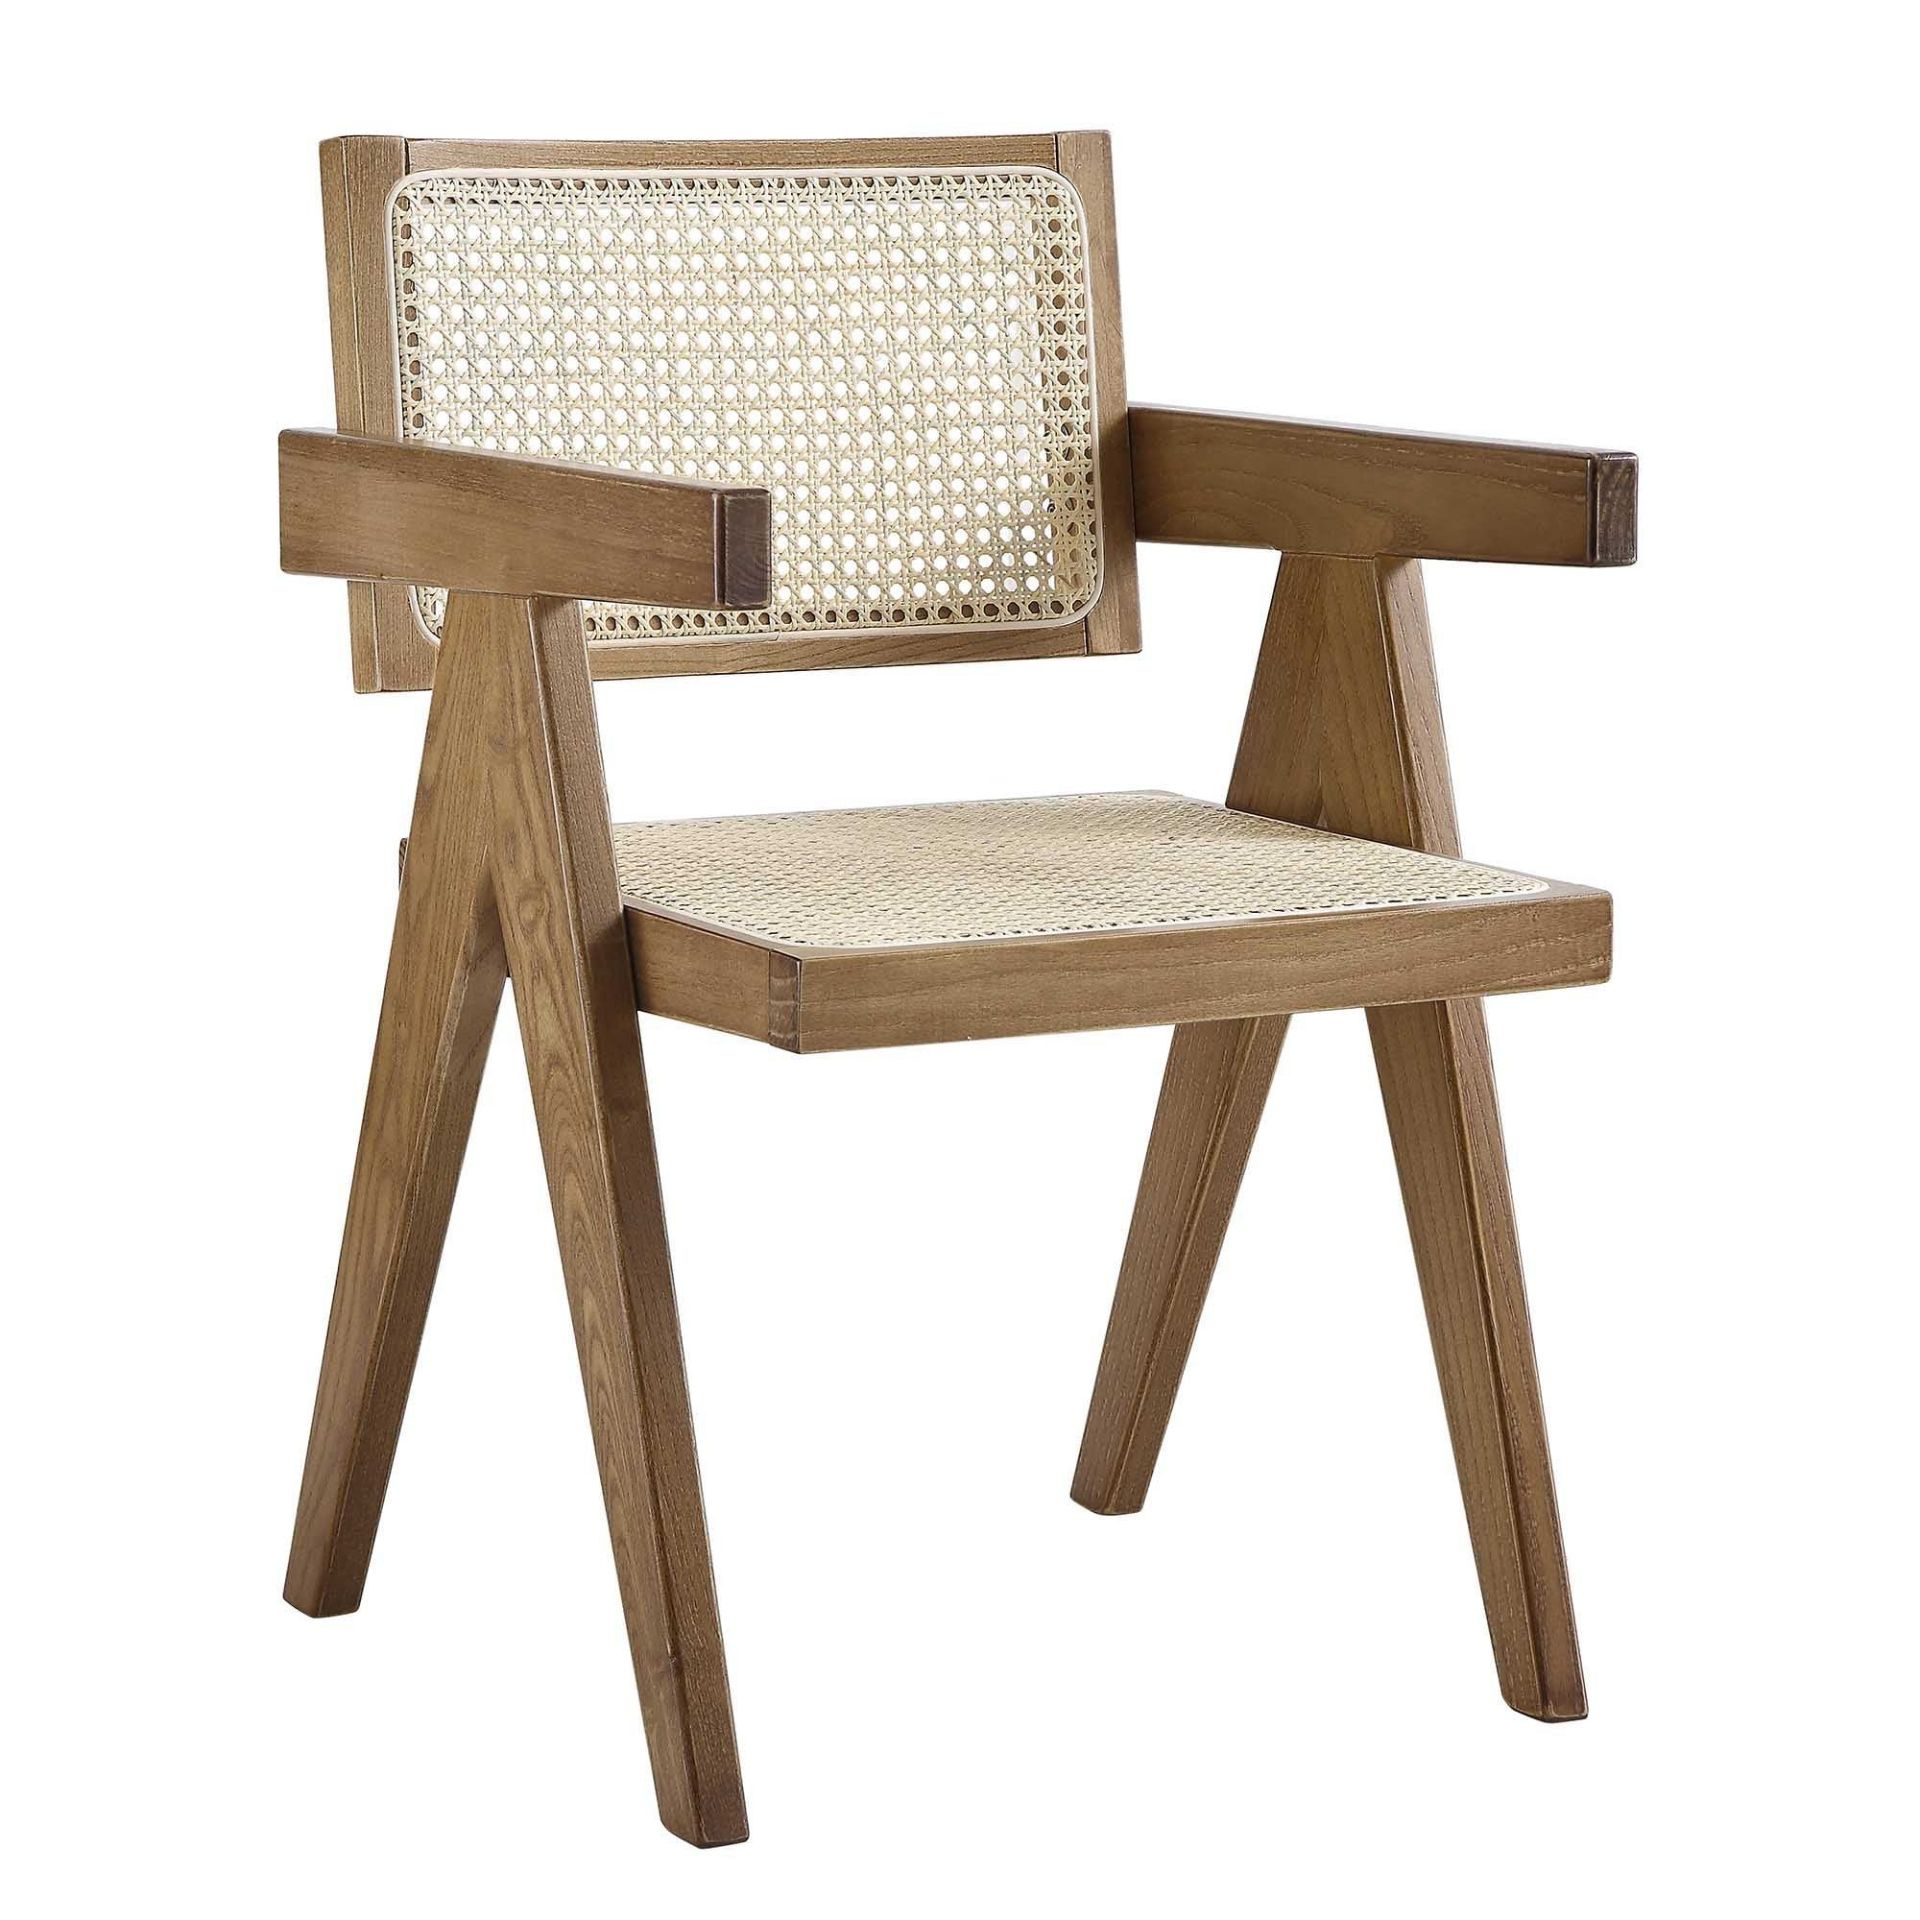 Jeanne Light Walnut Cane Rattan Solid Beech Wood Dining Chair. - R13.7. The cane rattan in the chair - Image 3 of 4